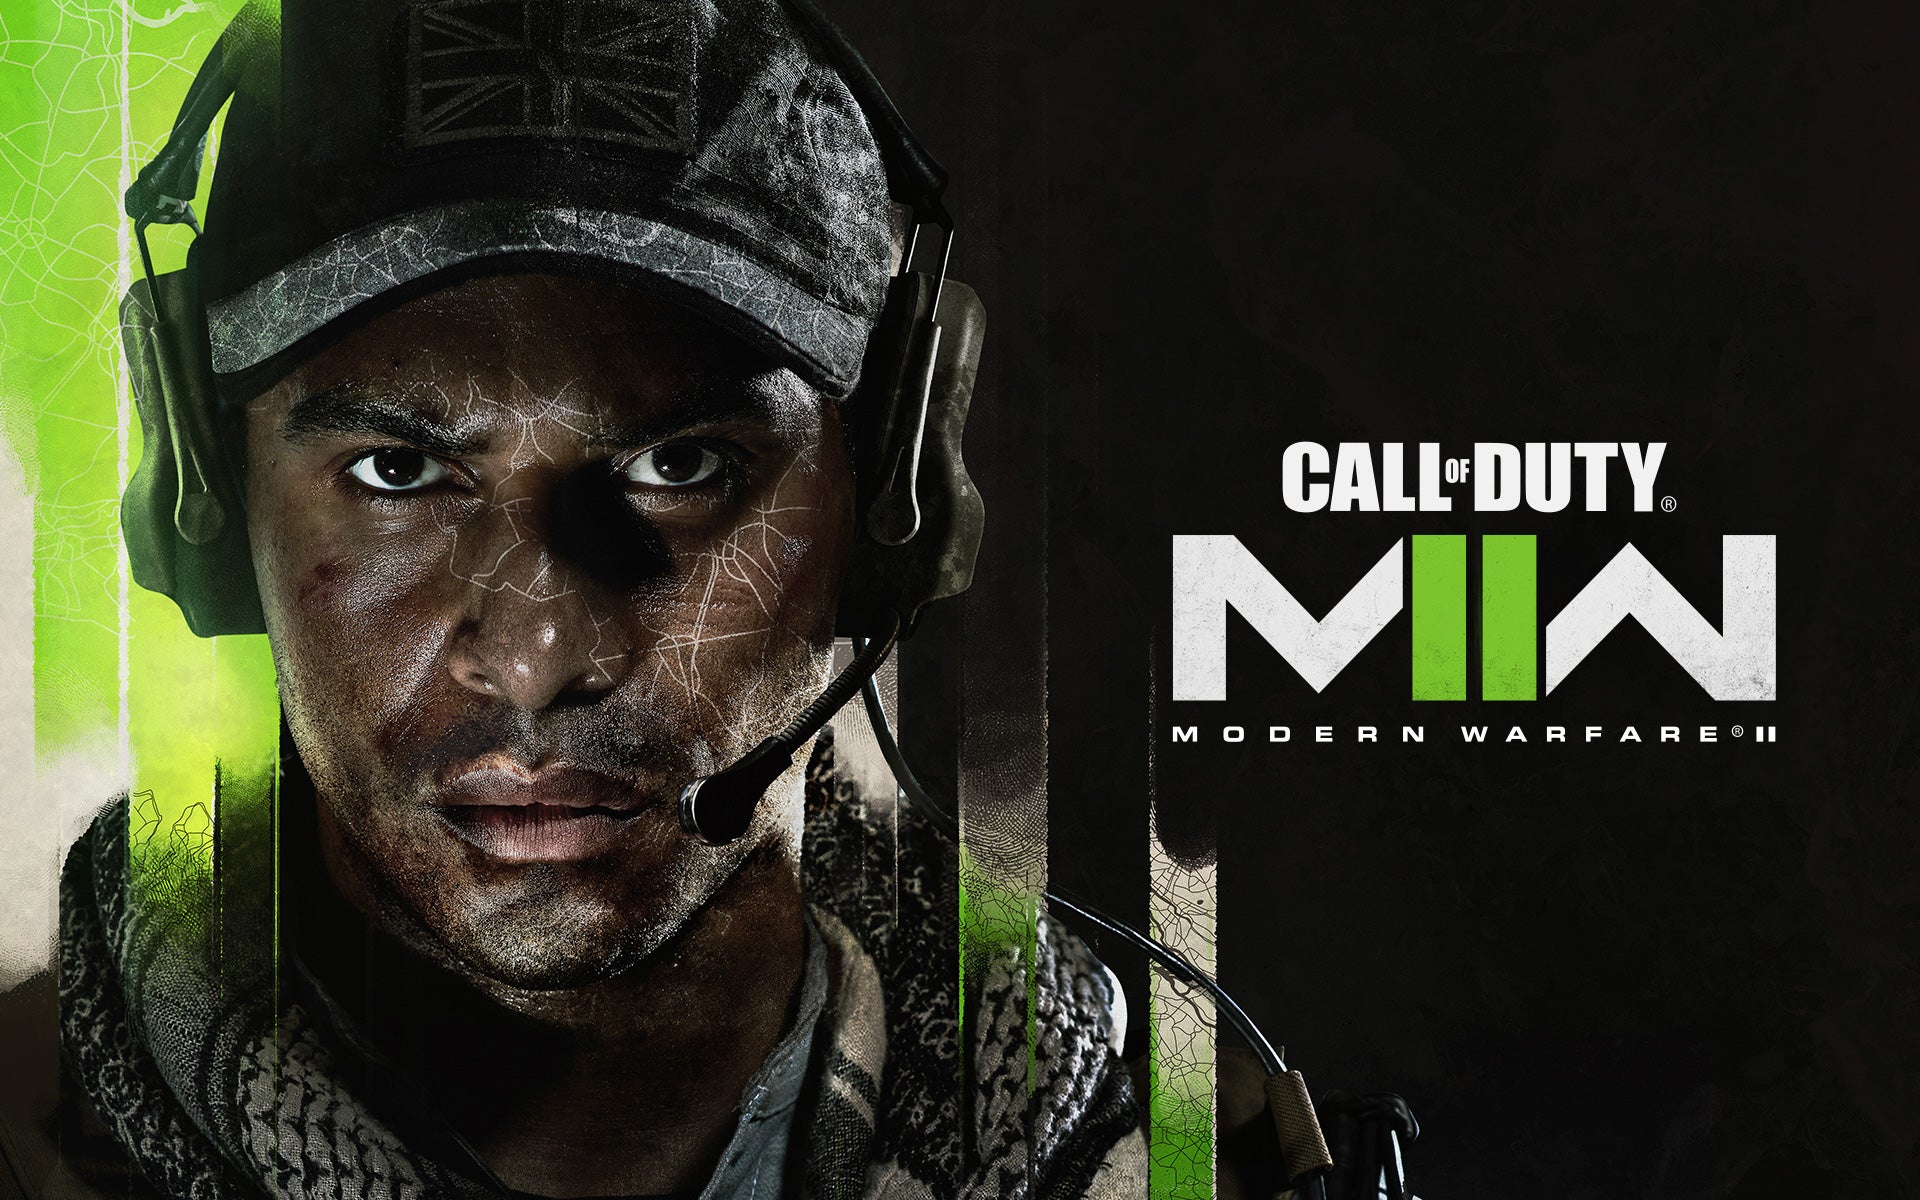 Call of Duty Modern Warfare 2 beta info, editions, and pre-order bonuses leaked by dataminers VG247 photo picture photo